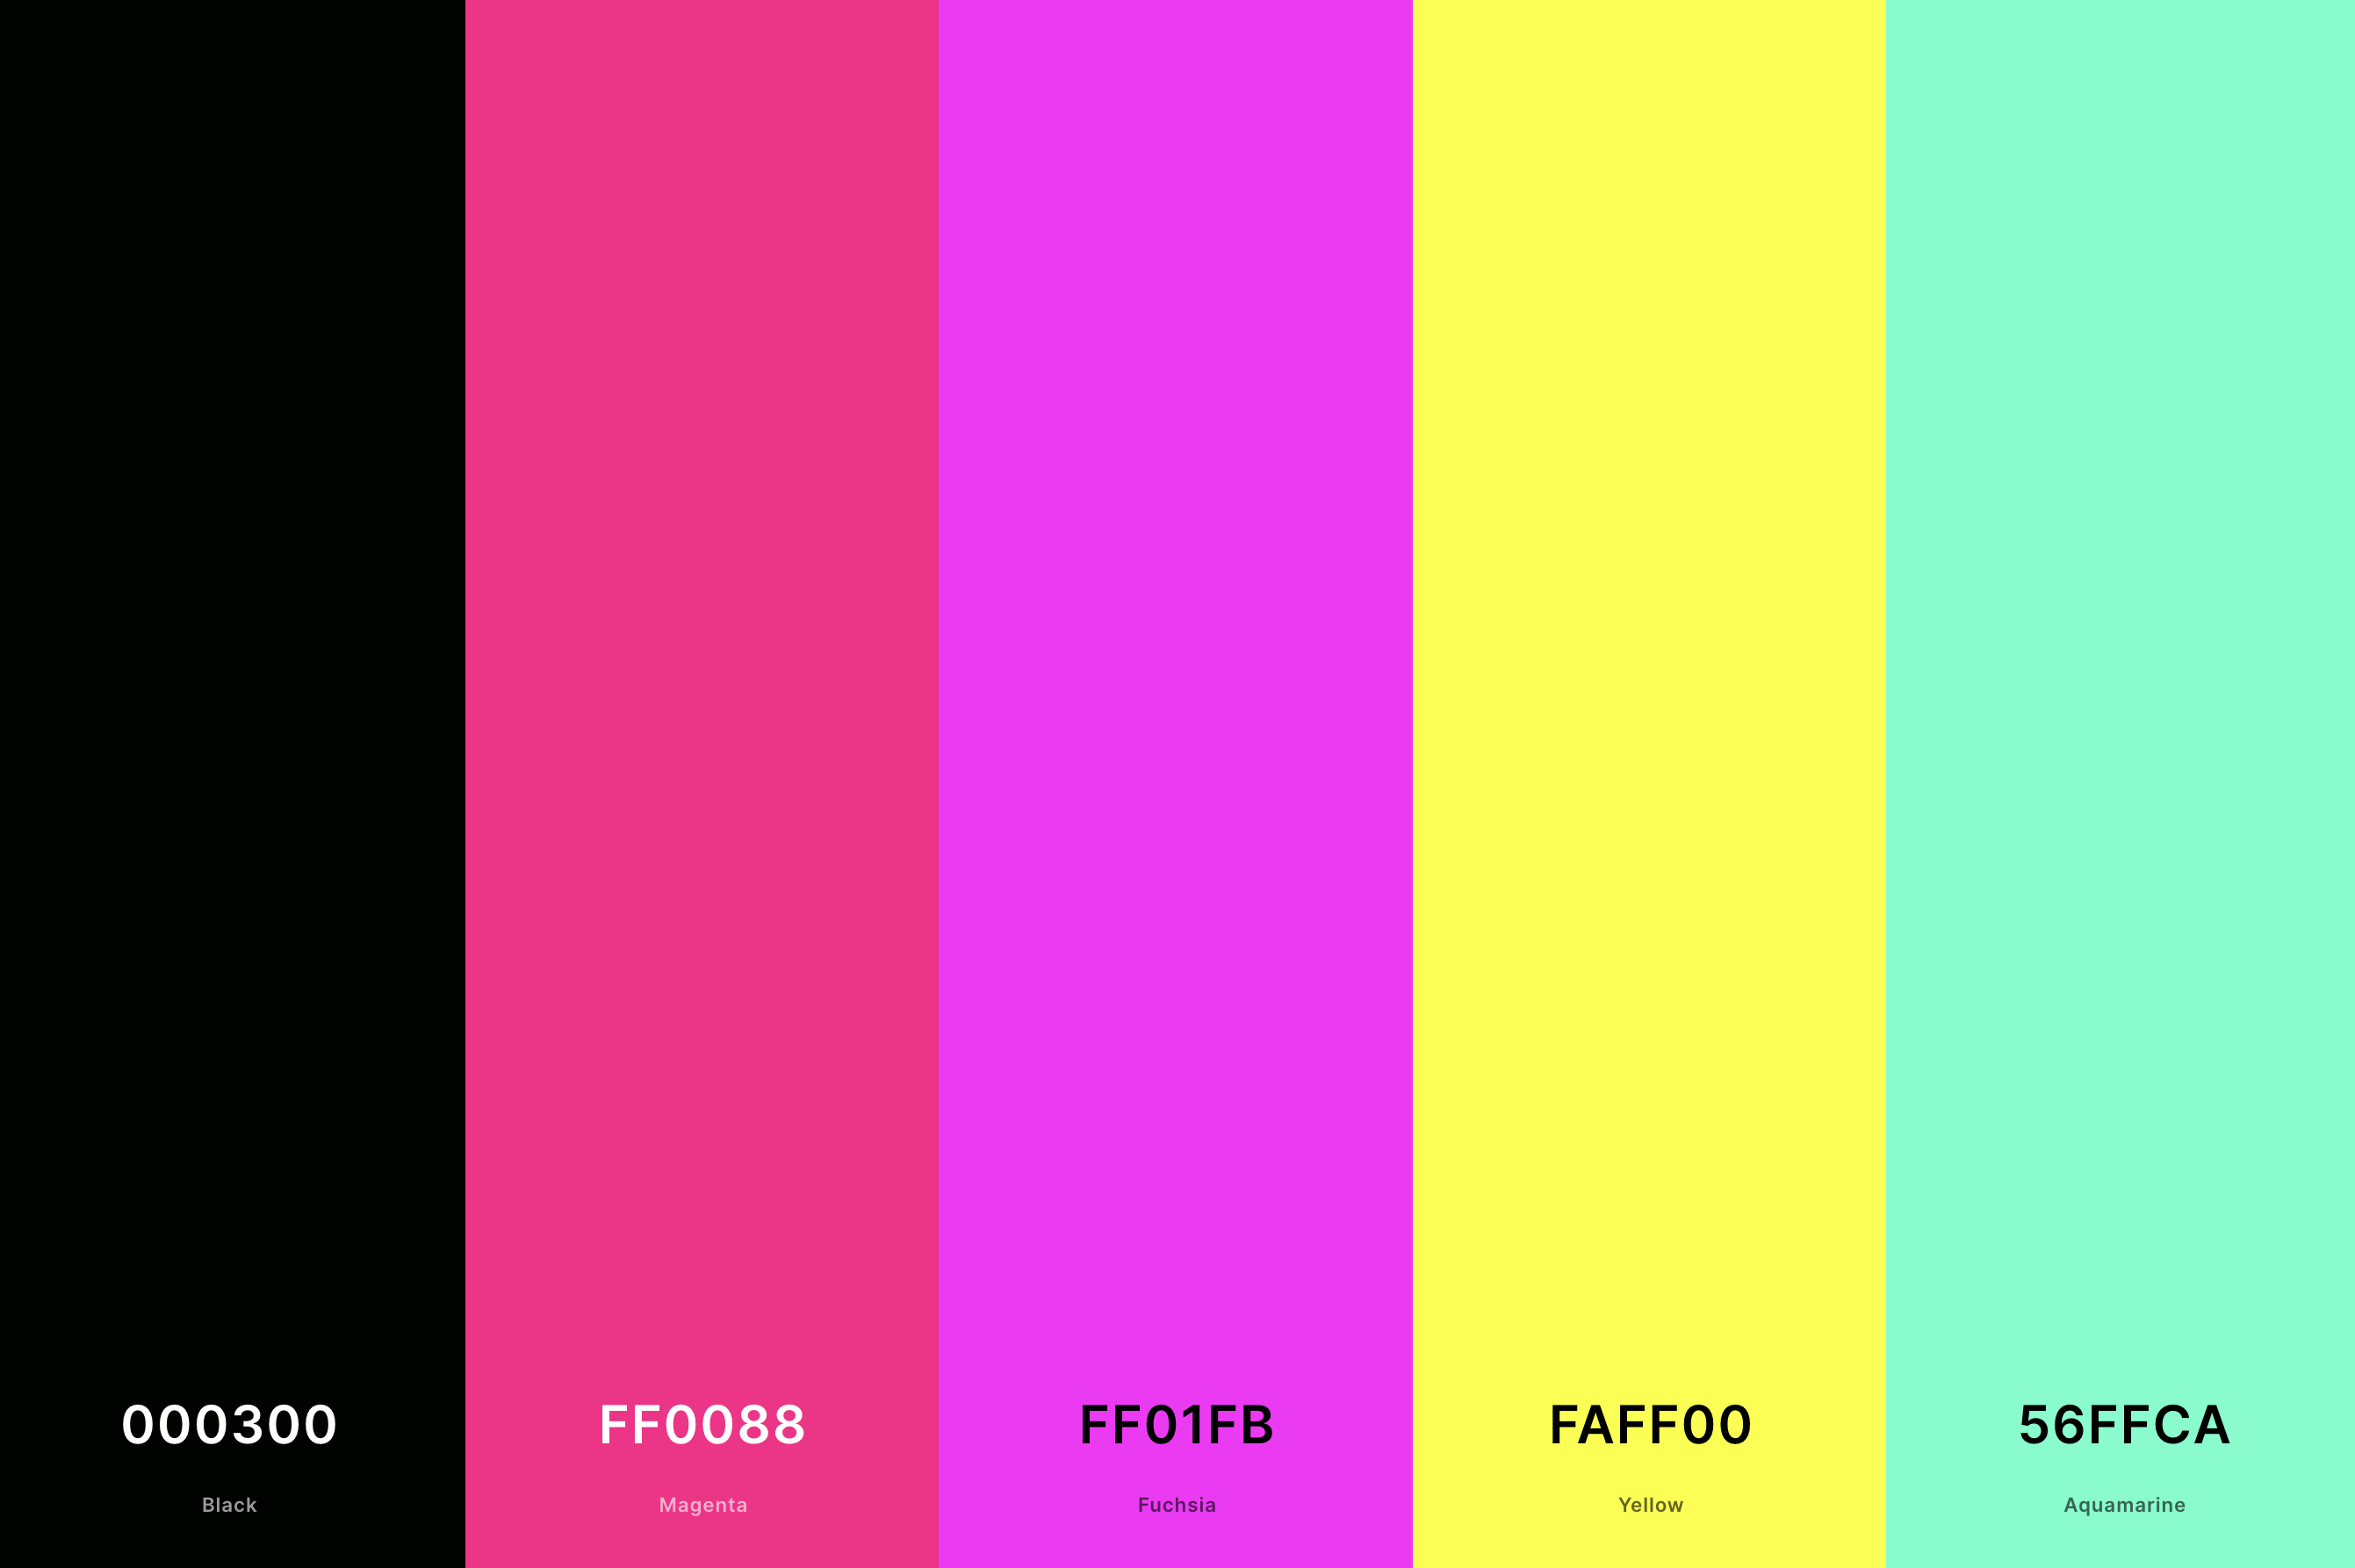 4. Neon Pink Color Palette Color Palette with Black (Hex #000300) + Magenta (Hex #FF0088) + Fuchsia (Hex #FF01FB) + Yellow (Hex #FAFF00) + Aquamarine (Hex #56FFCA) Color Palette with Hex Codes